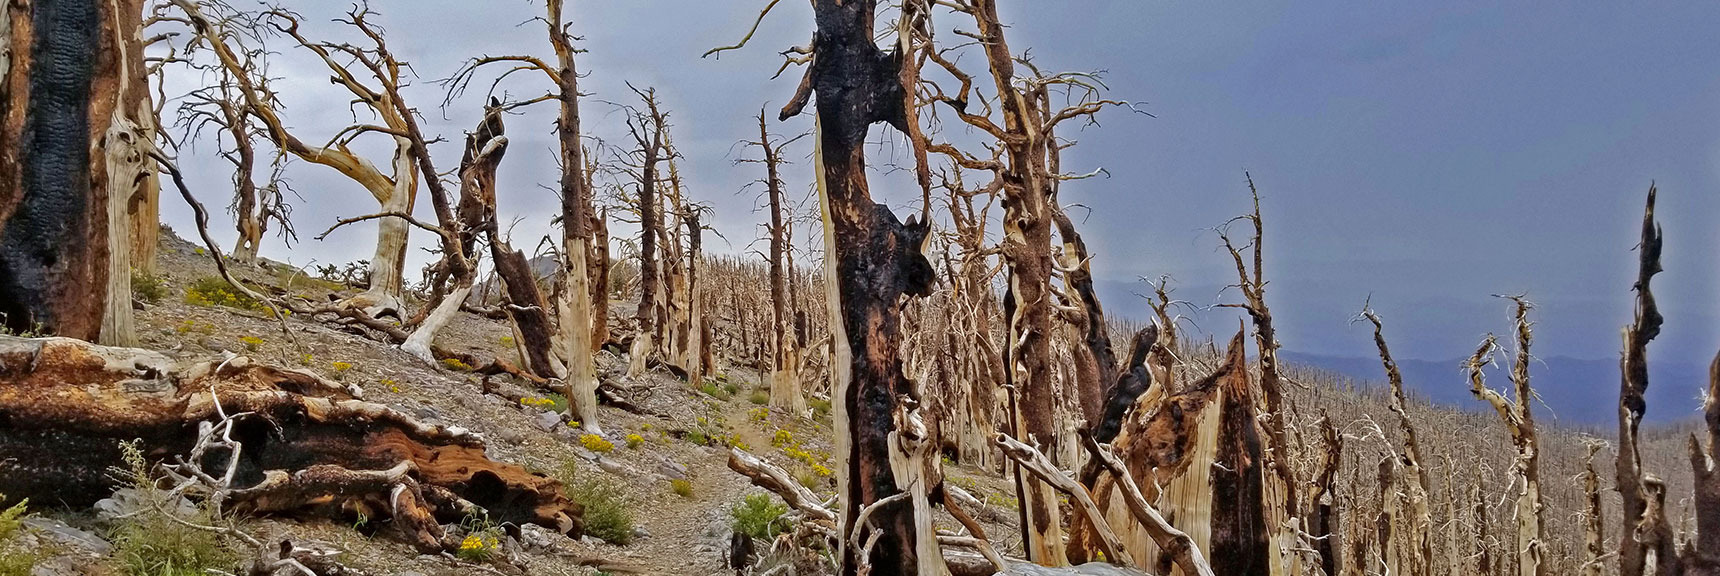 South Loop Trail Navigates Through the 2013 Burn Area. Ancient Bristlecone Skeleton Forest Remains | Lee and Charleston Peaks via Lee Canyon Mid Ridge | Mt Charleston Wilderness | Spring Mountains, Nevada